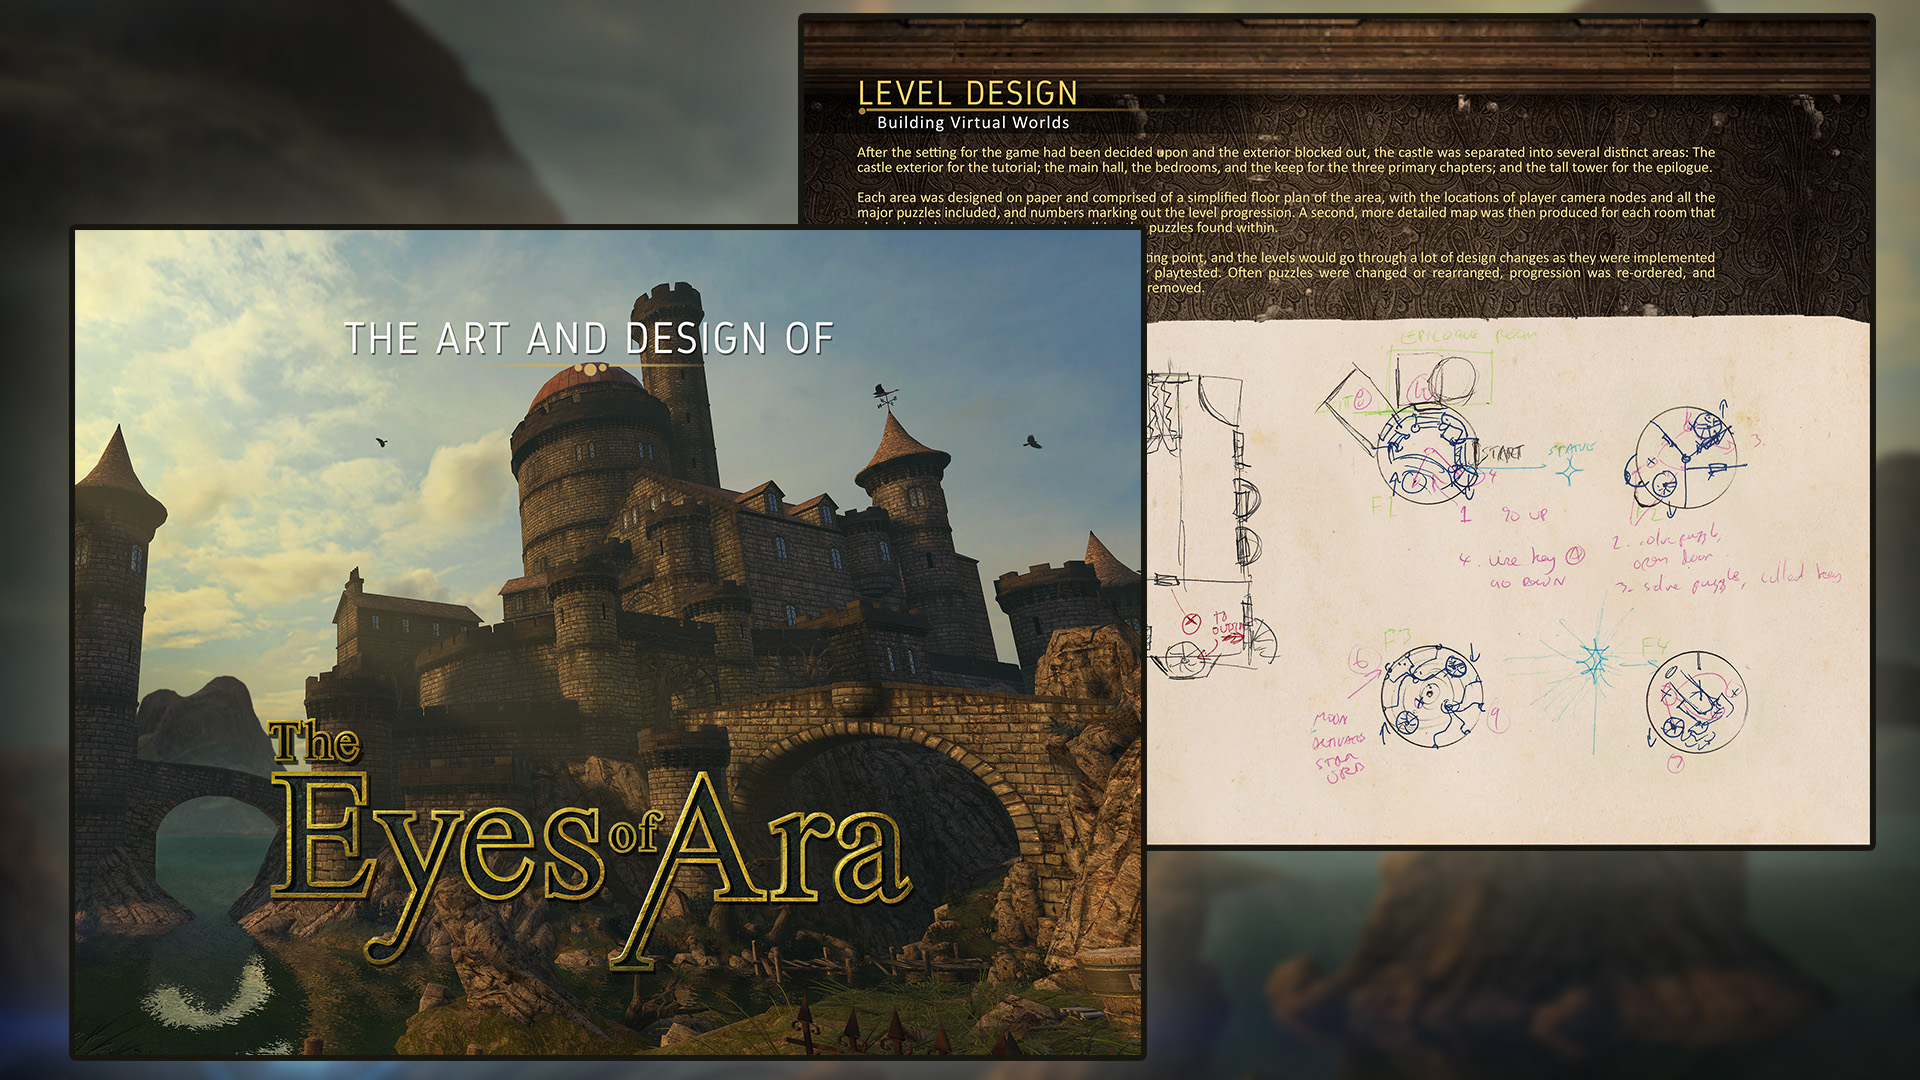 The Art and Design of The Eyes of Ara Featured Screenshot #1